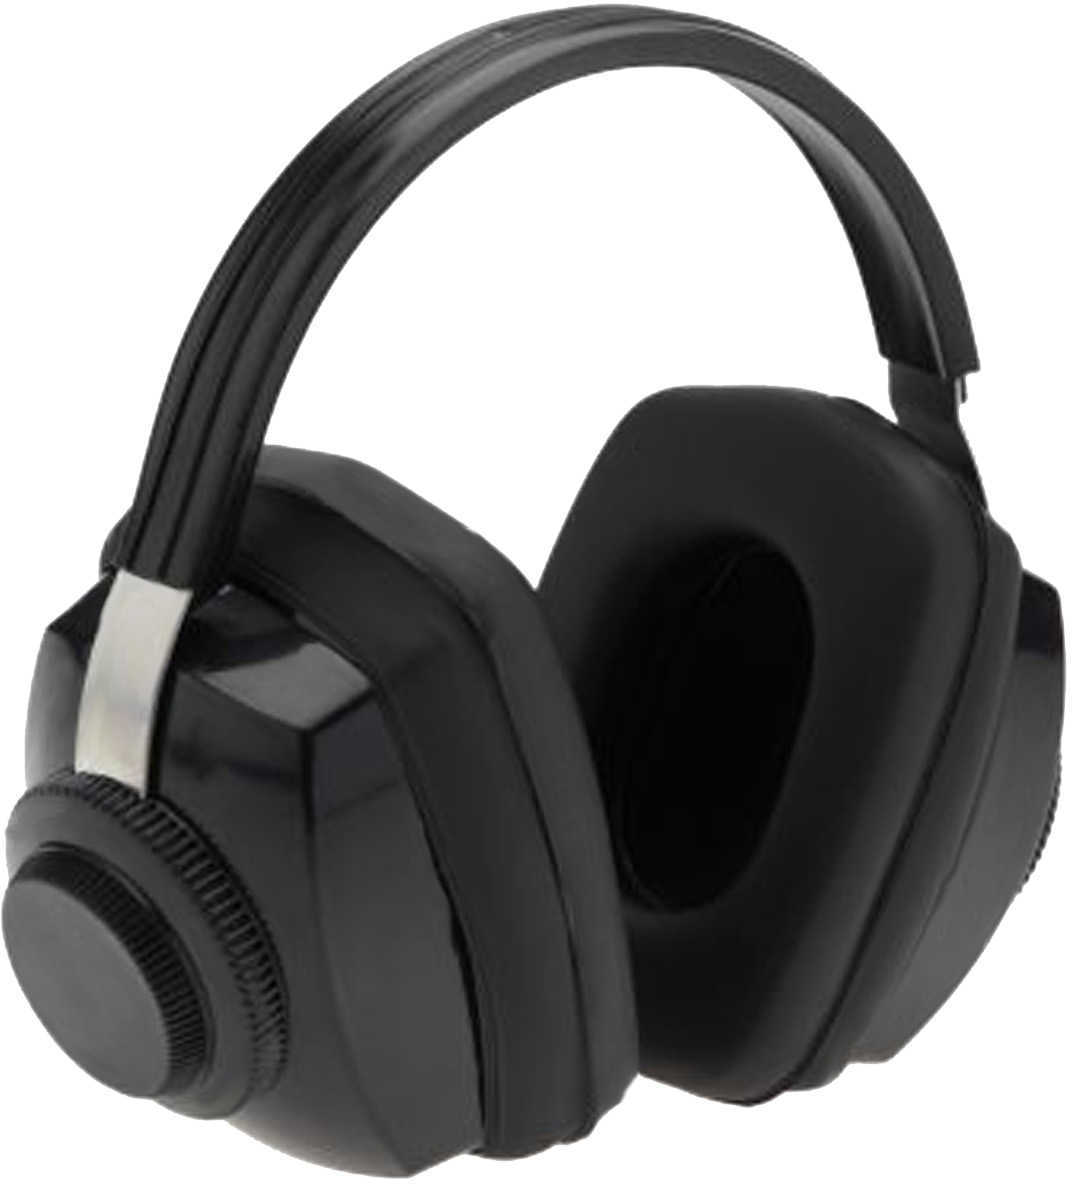 Competitor Hearing Protection Black NRR 26Db - Traditional Design, Multi-Position Earmuff - Fully Adjustable Steel heaDb